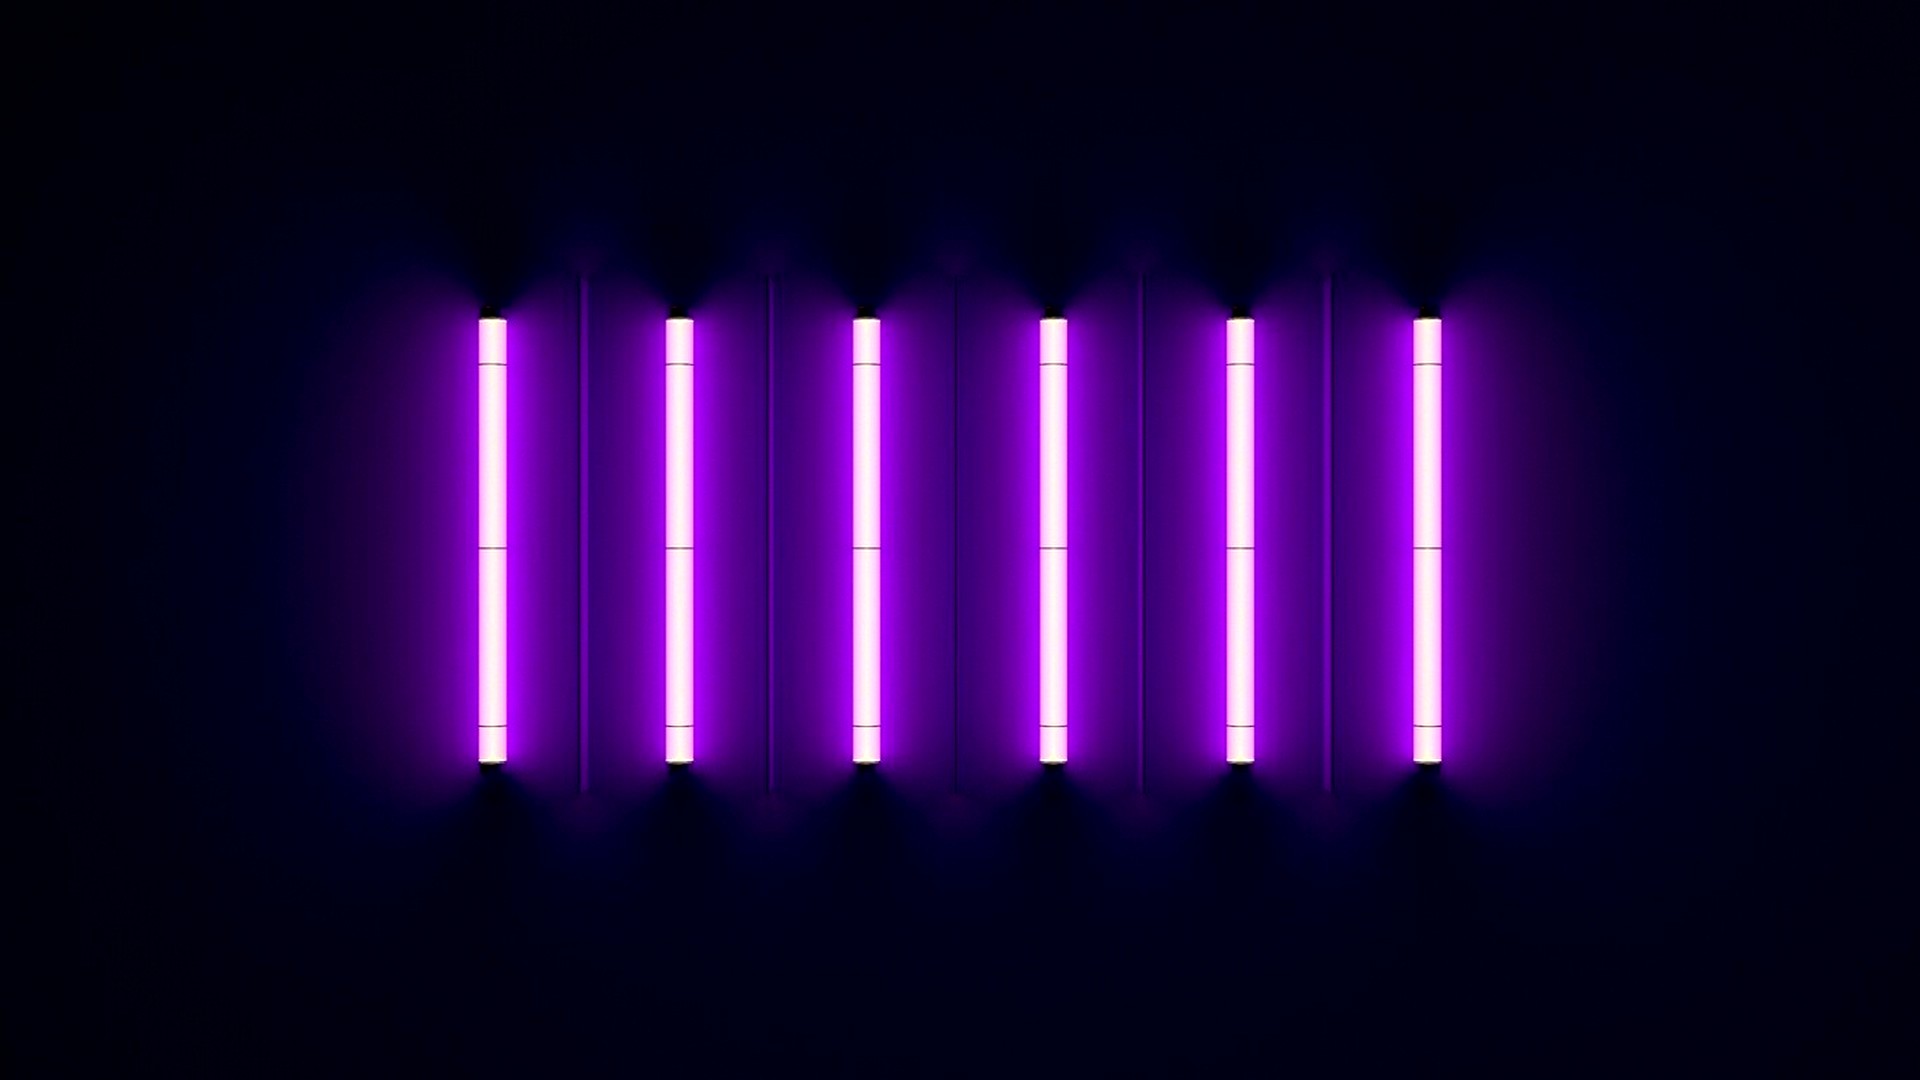 Wallpaper Neon Purple Desktop with high-resolution 1920x1080 pixel. You can use this wallpaper for your Windows and Mac OS computers as well as your Android and iPhone smartphones